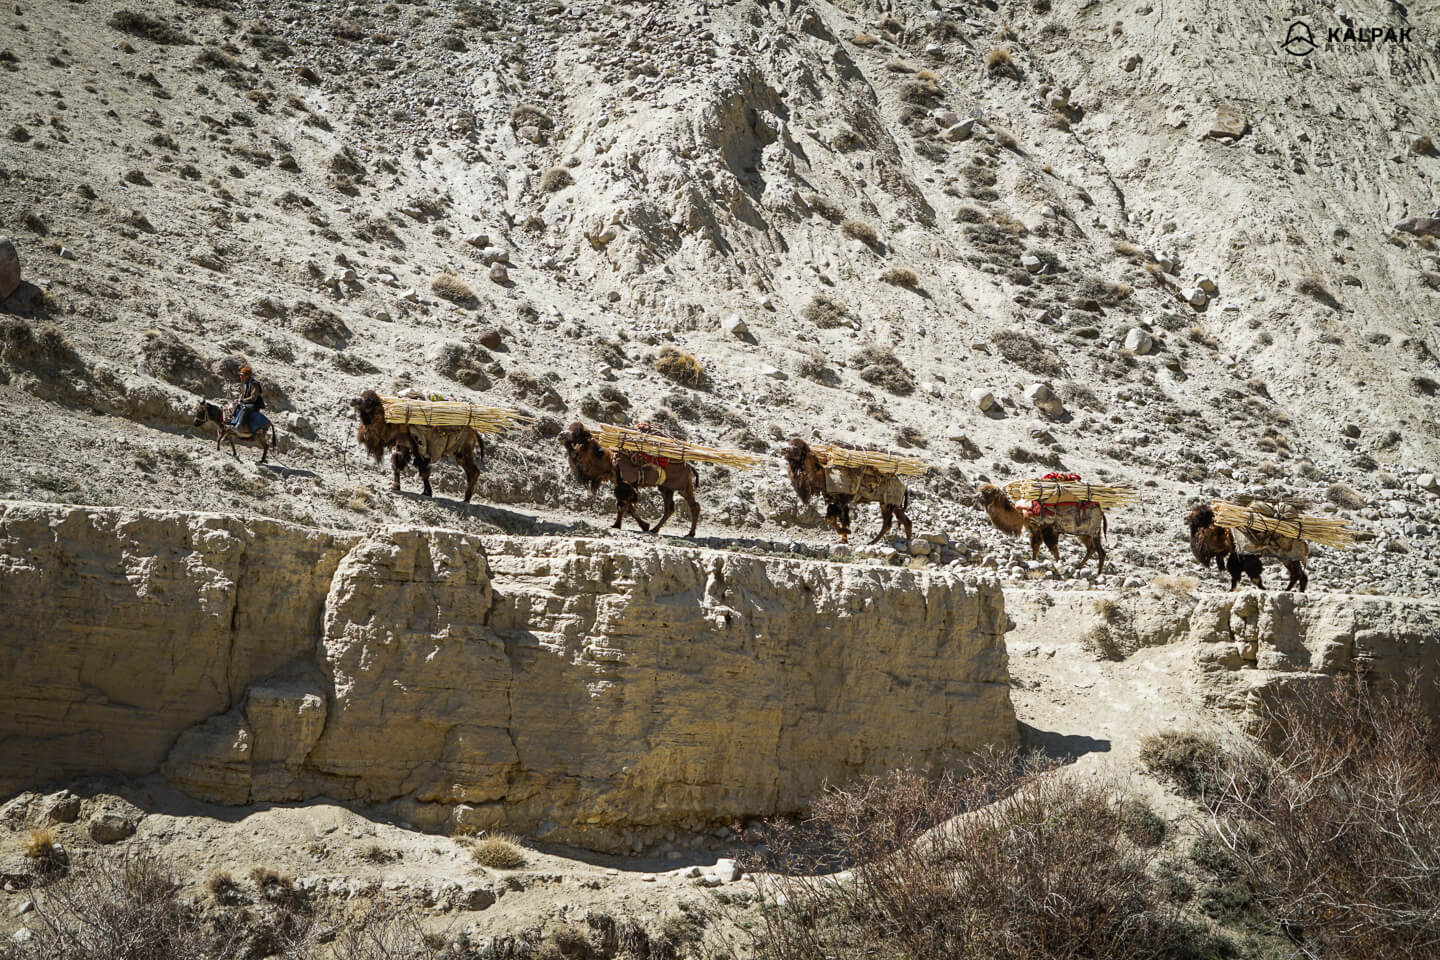 Camels on the Pamir Highway as in the times of the Silk Road trade